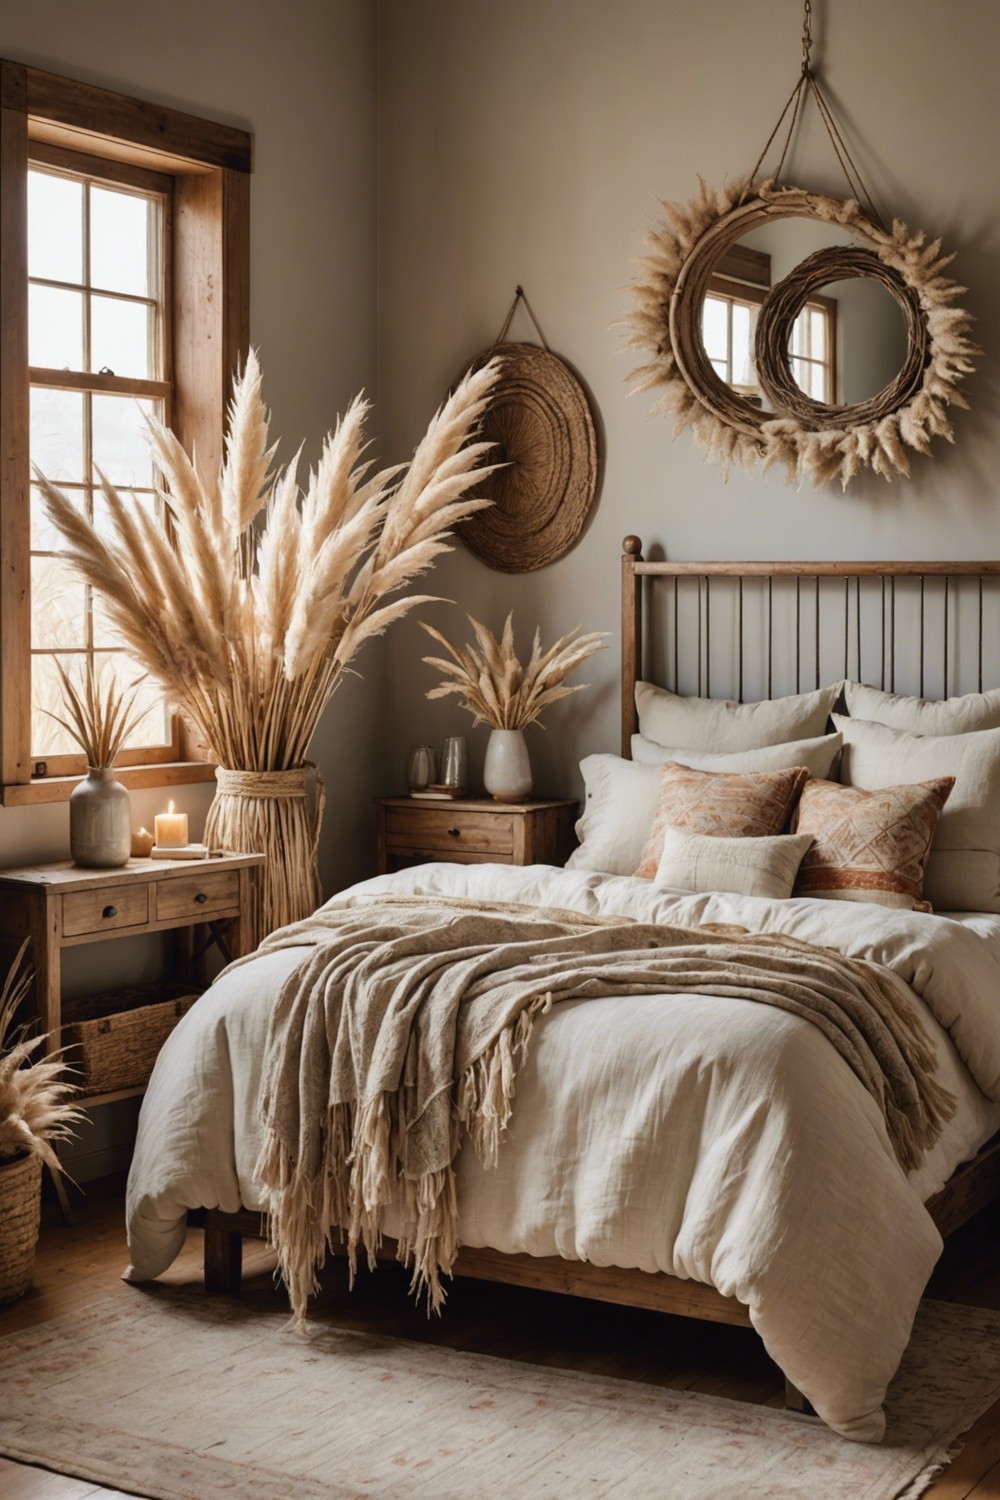 Incorporating Natural Elements Like Pampas Grass